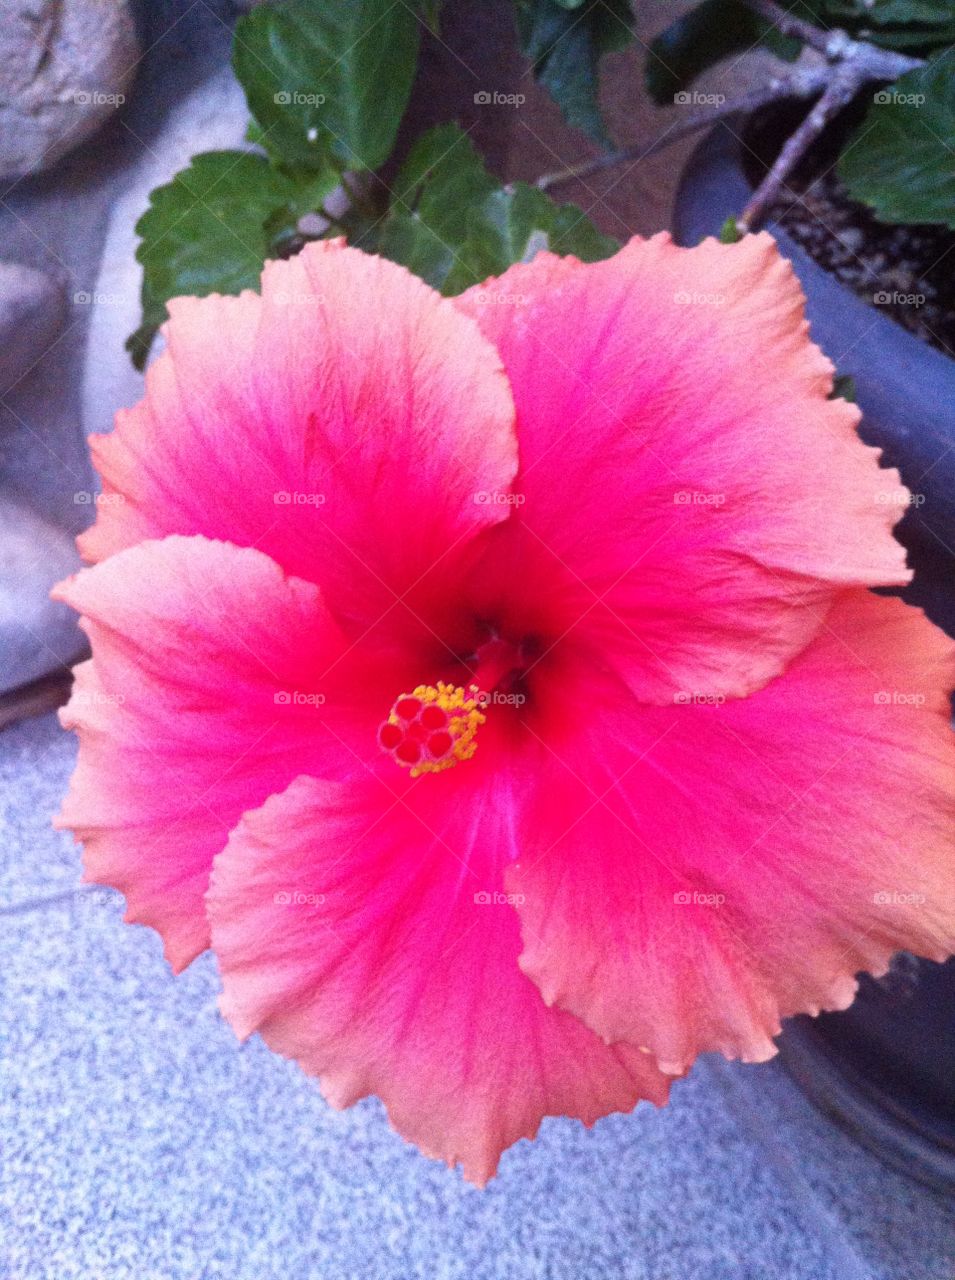 Hibiscus from my Brentwood Ca home garden